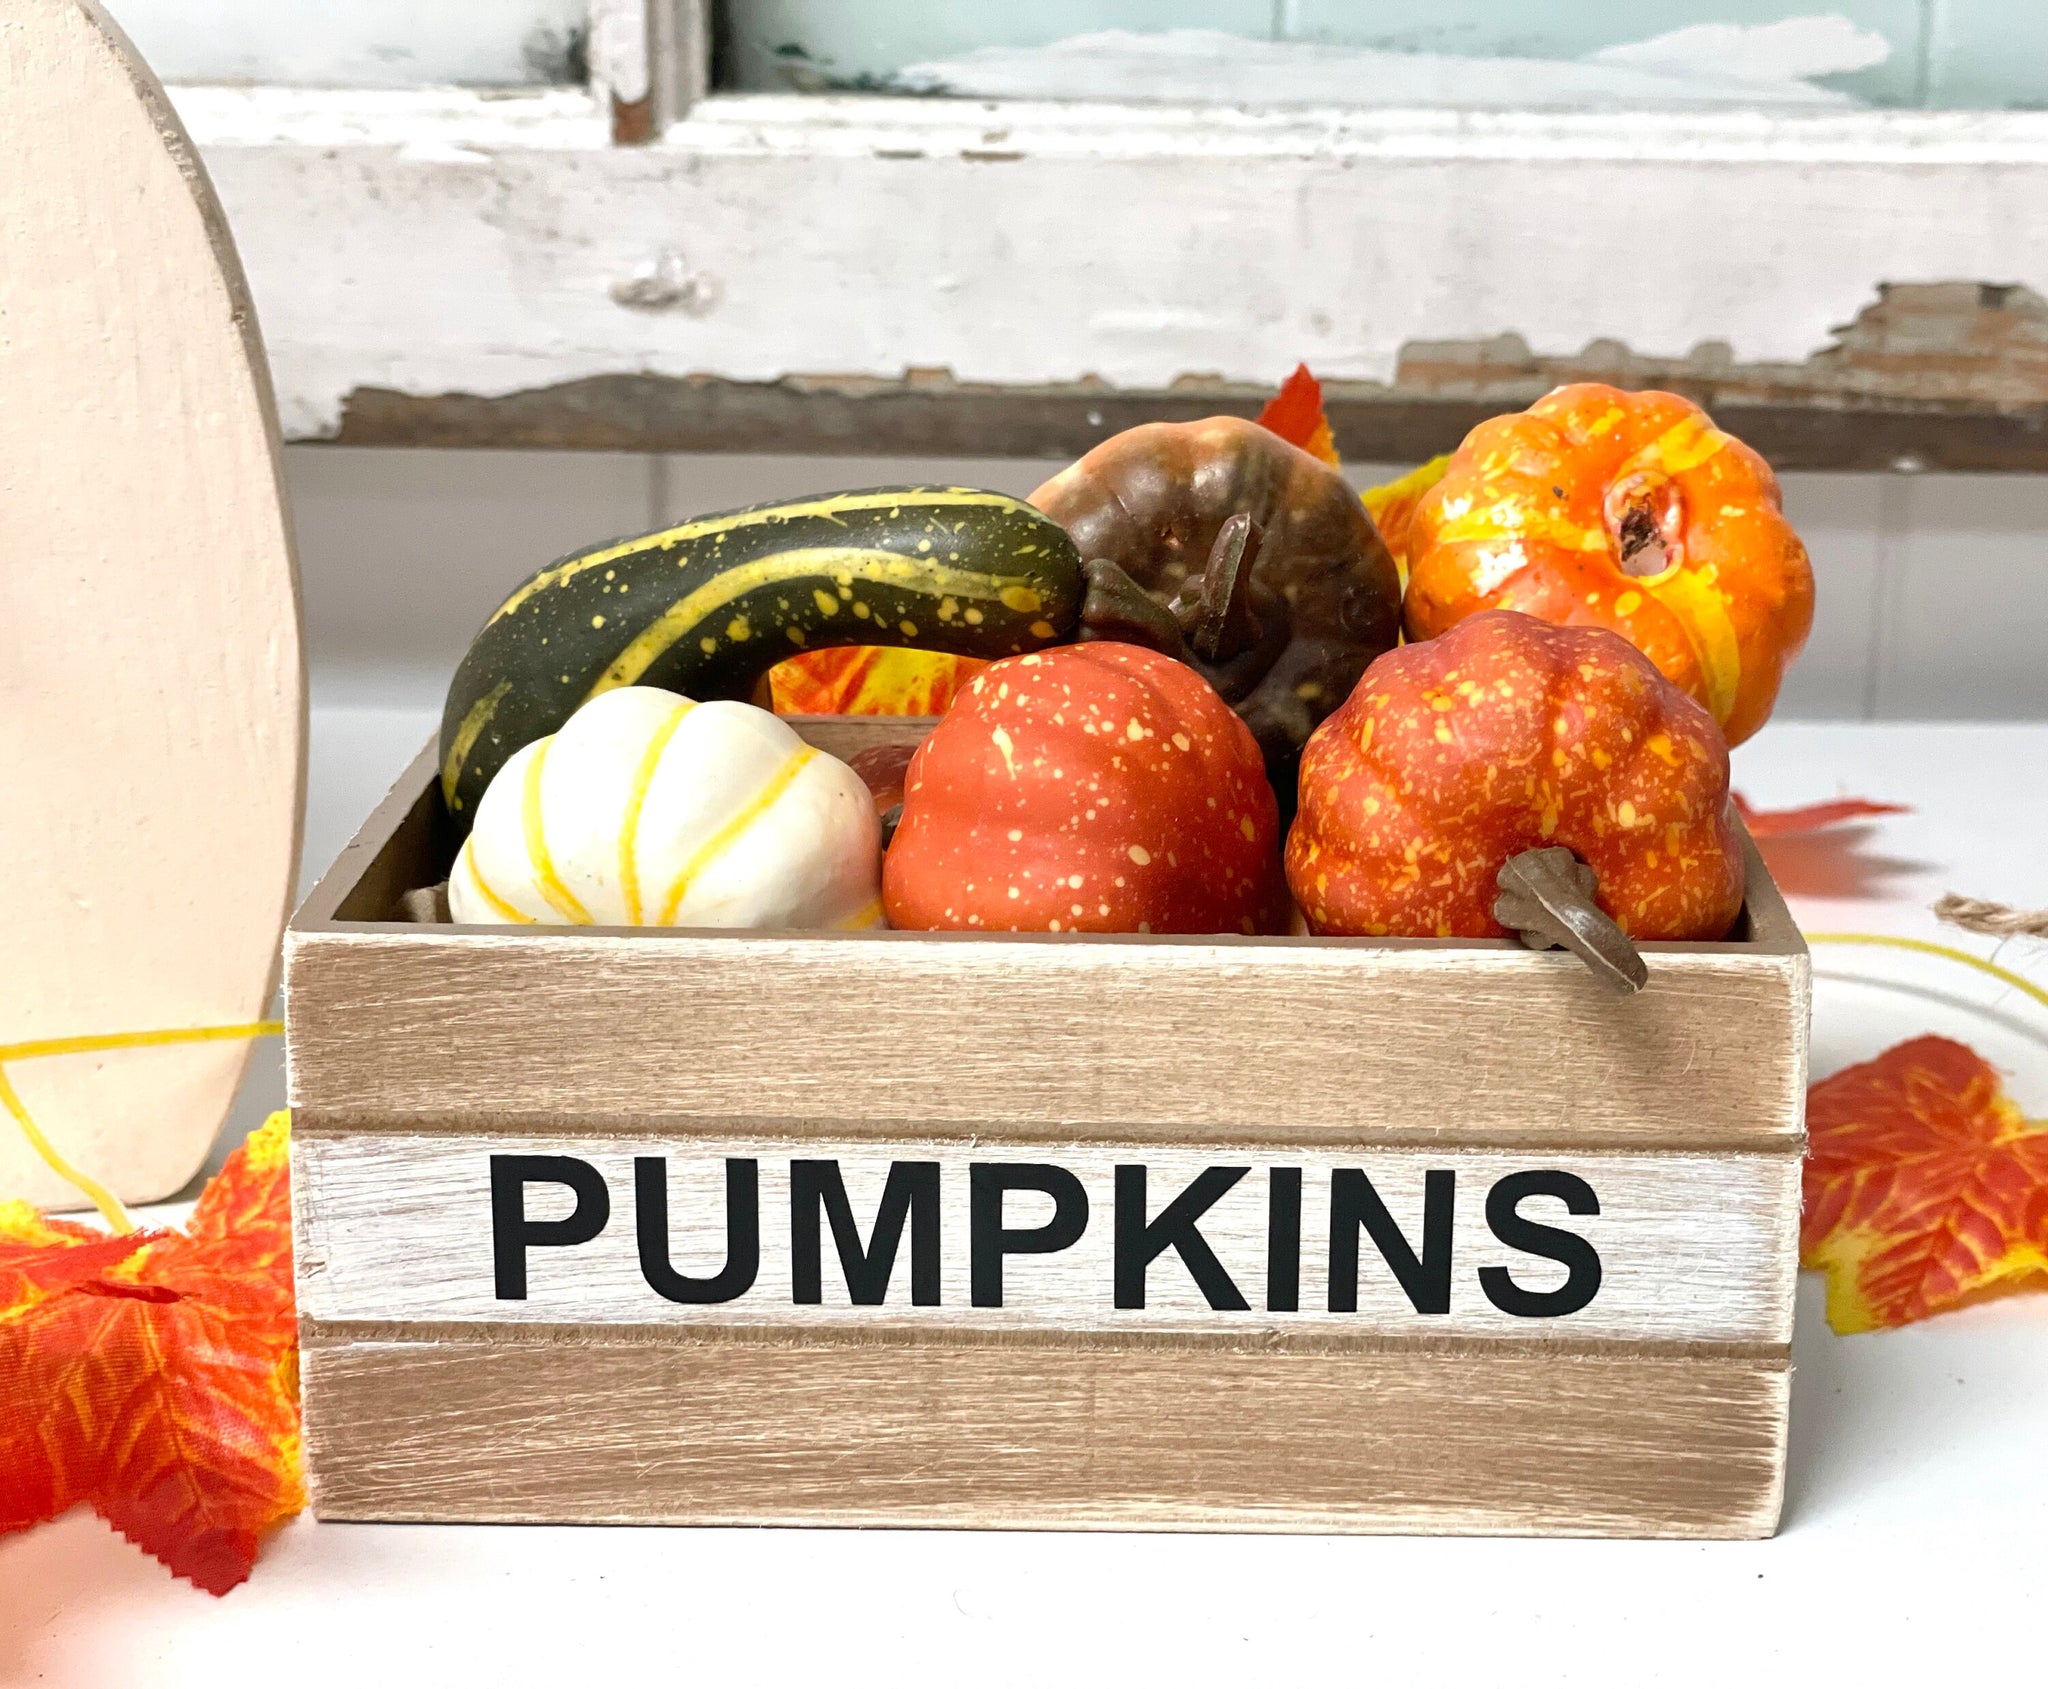 Pumpkin crate with pumpkins, Fall tiered tray